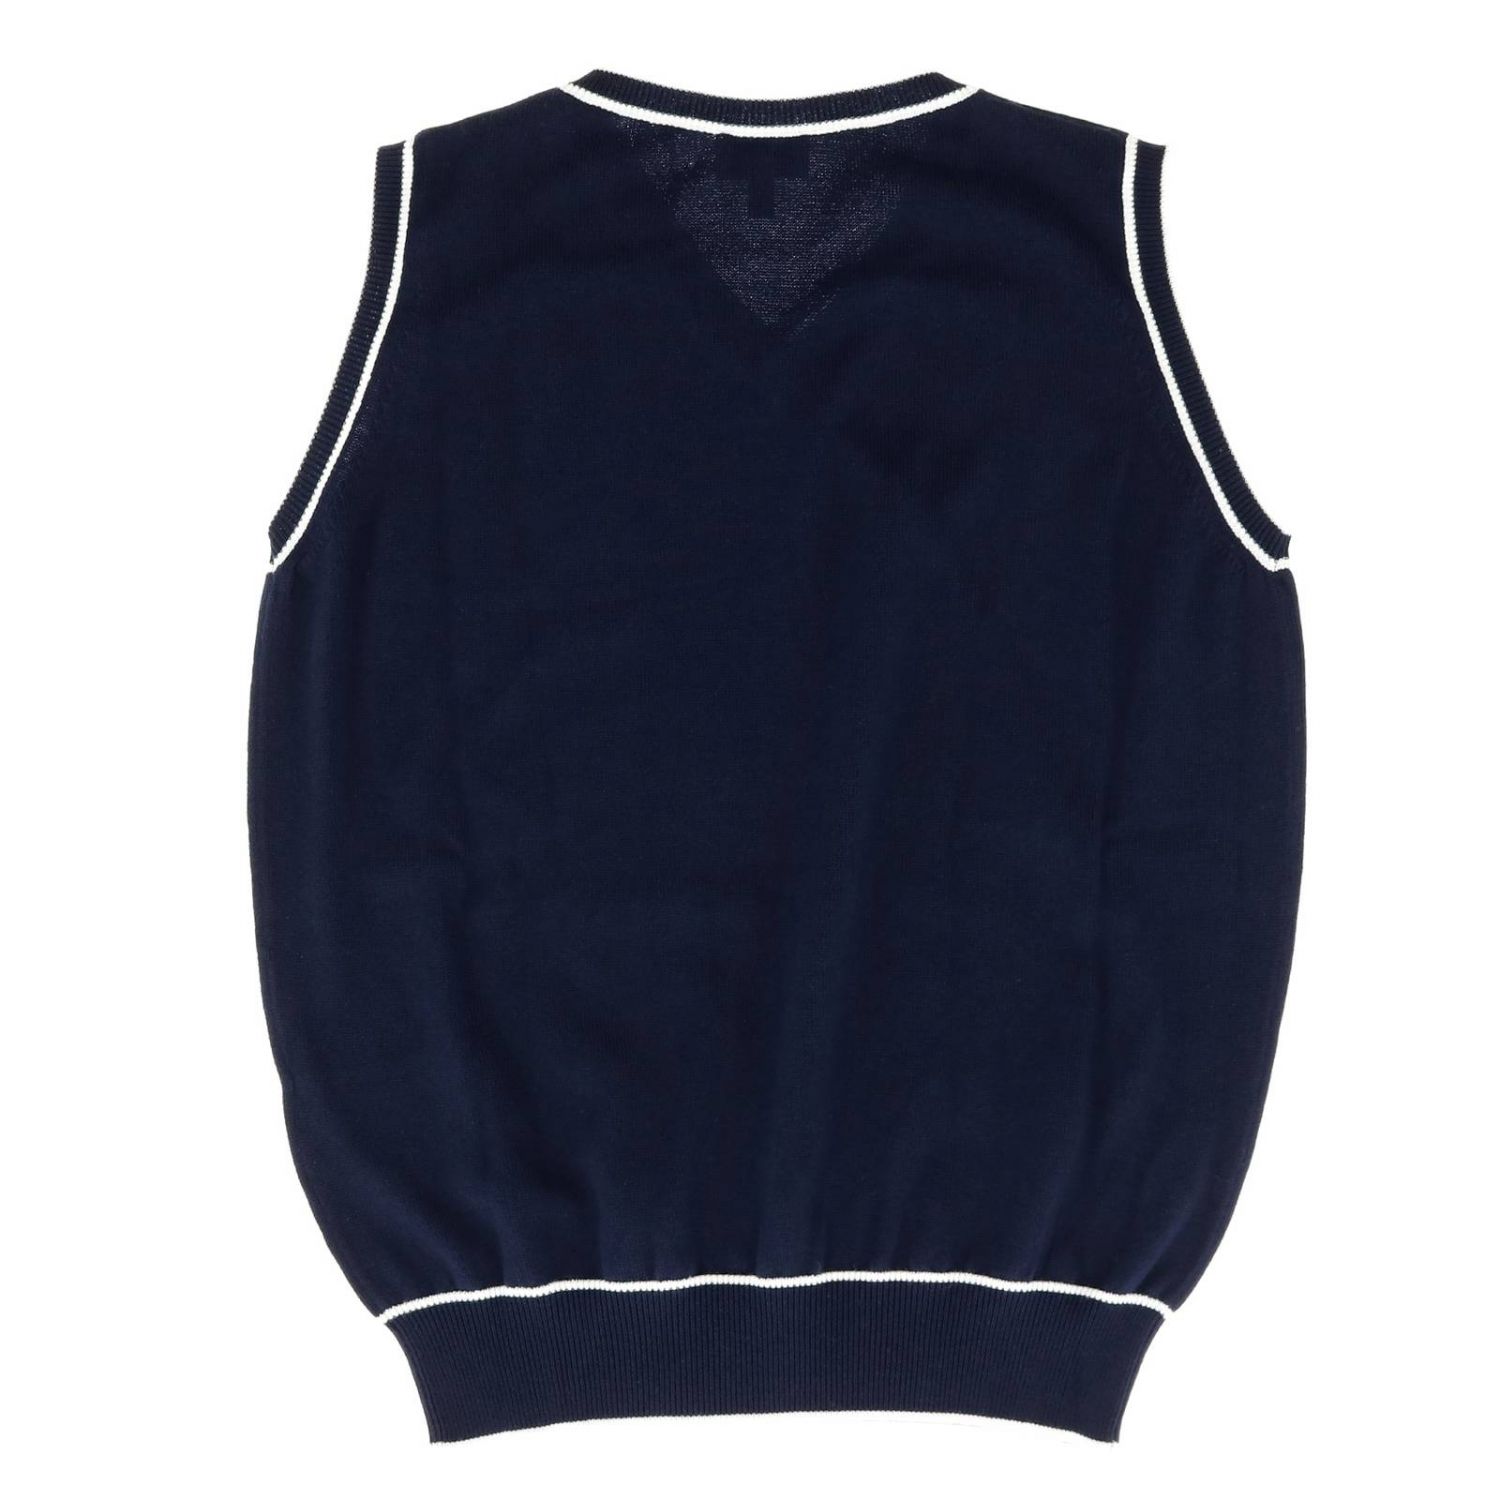 Fay Outlet: sweater for boys - Blue | Fay sweater NNIC1387520 QVT